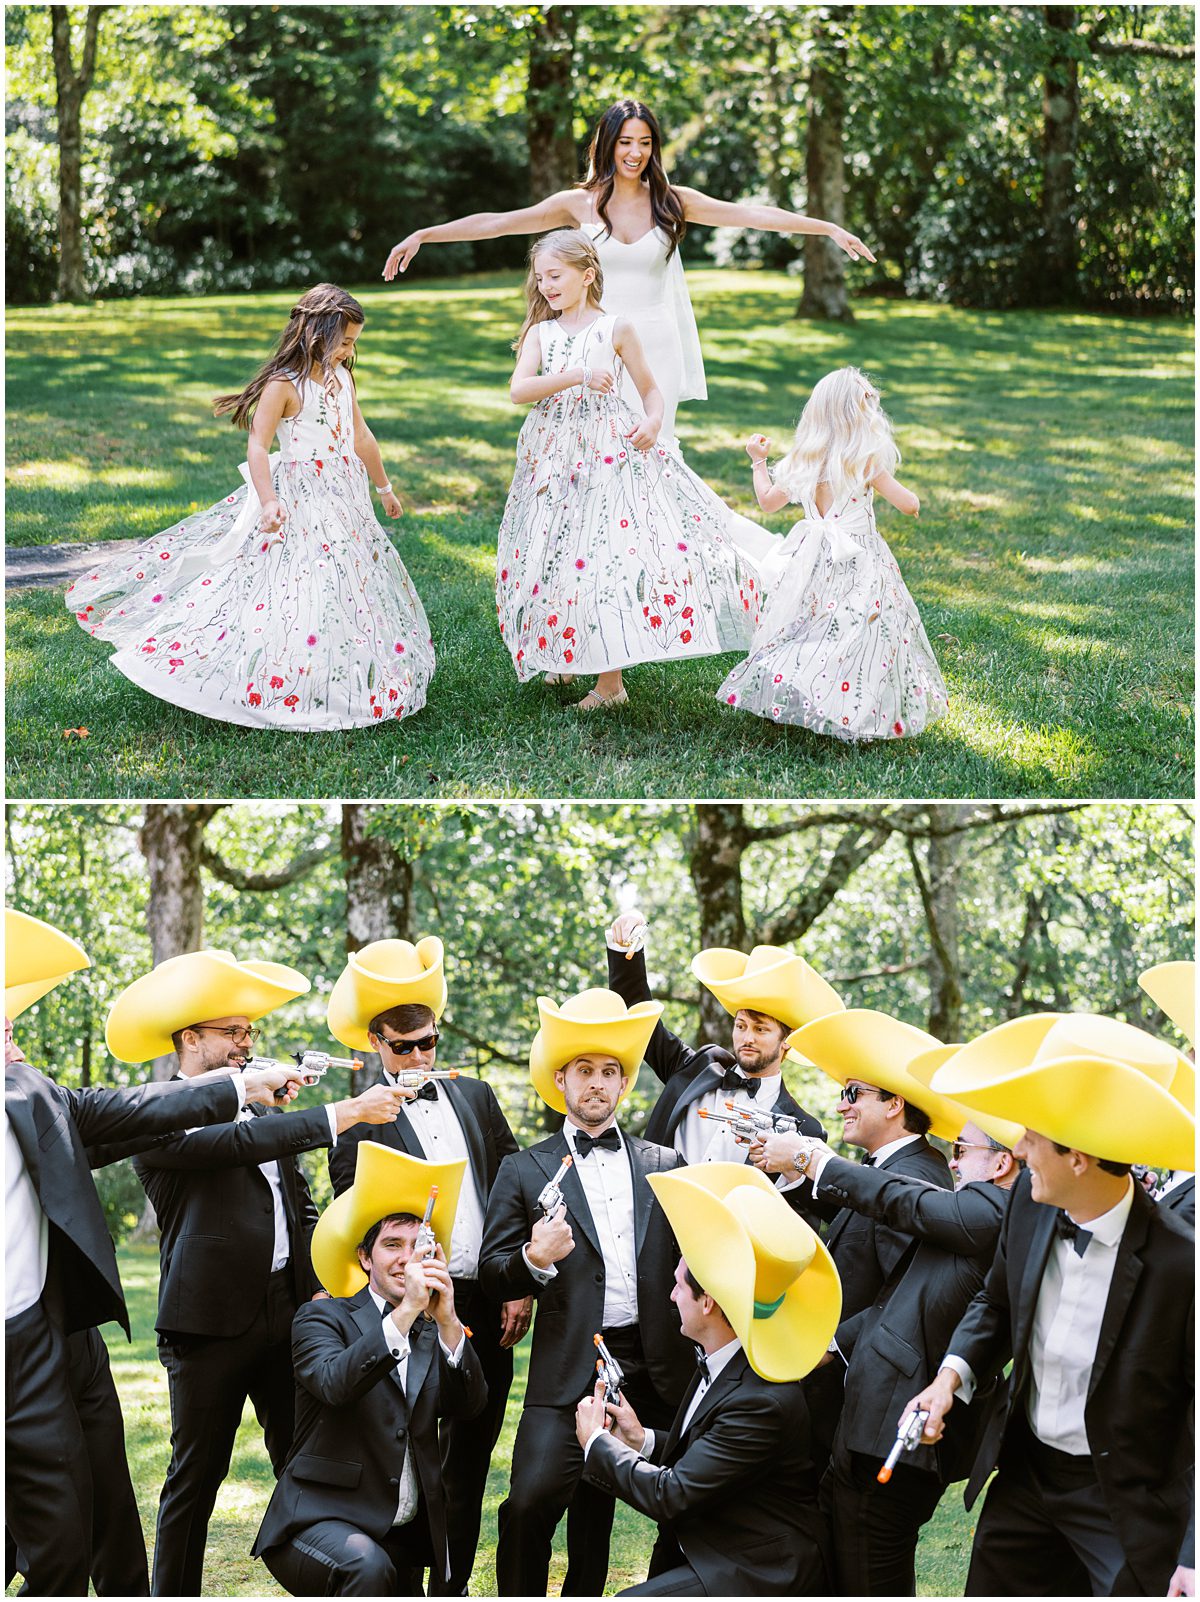 The groomsmen add a playful touch to group photos with bright yellow cowboy hats and pop guns for a fun photo with the groom